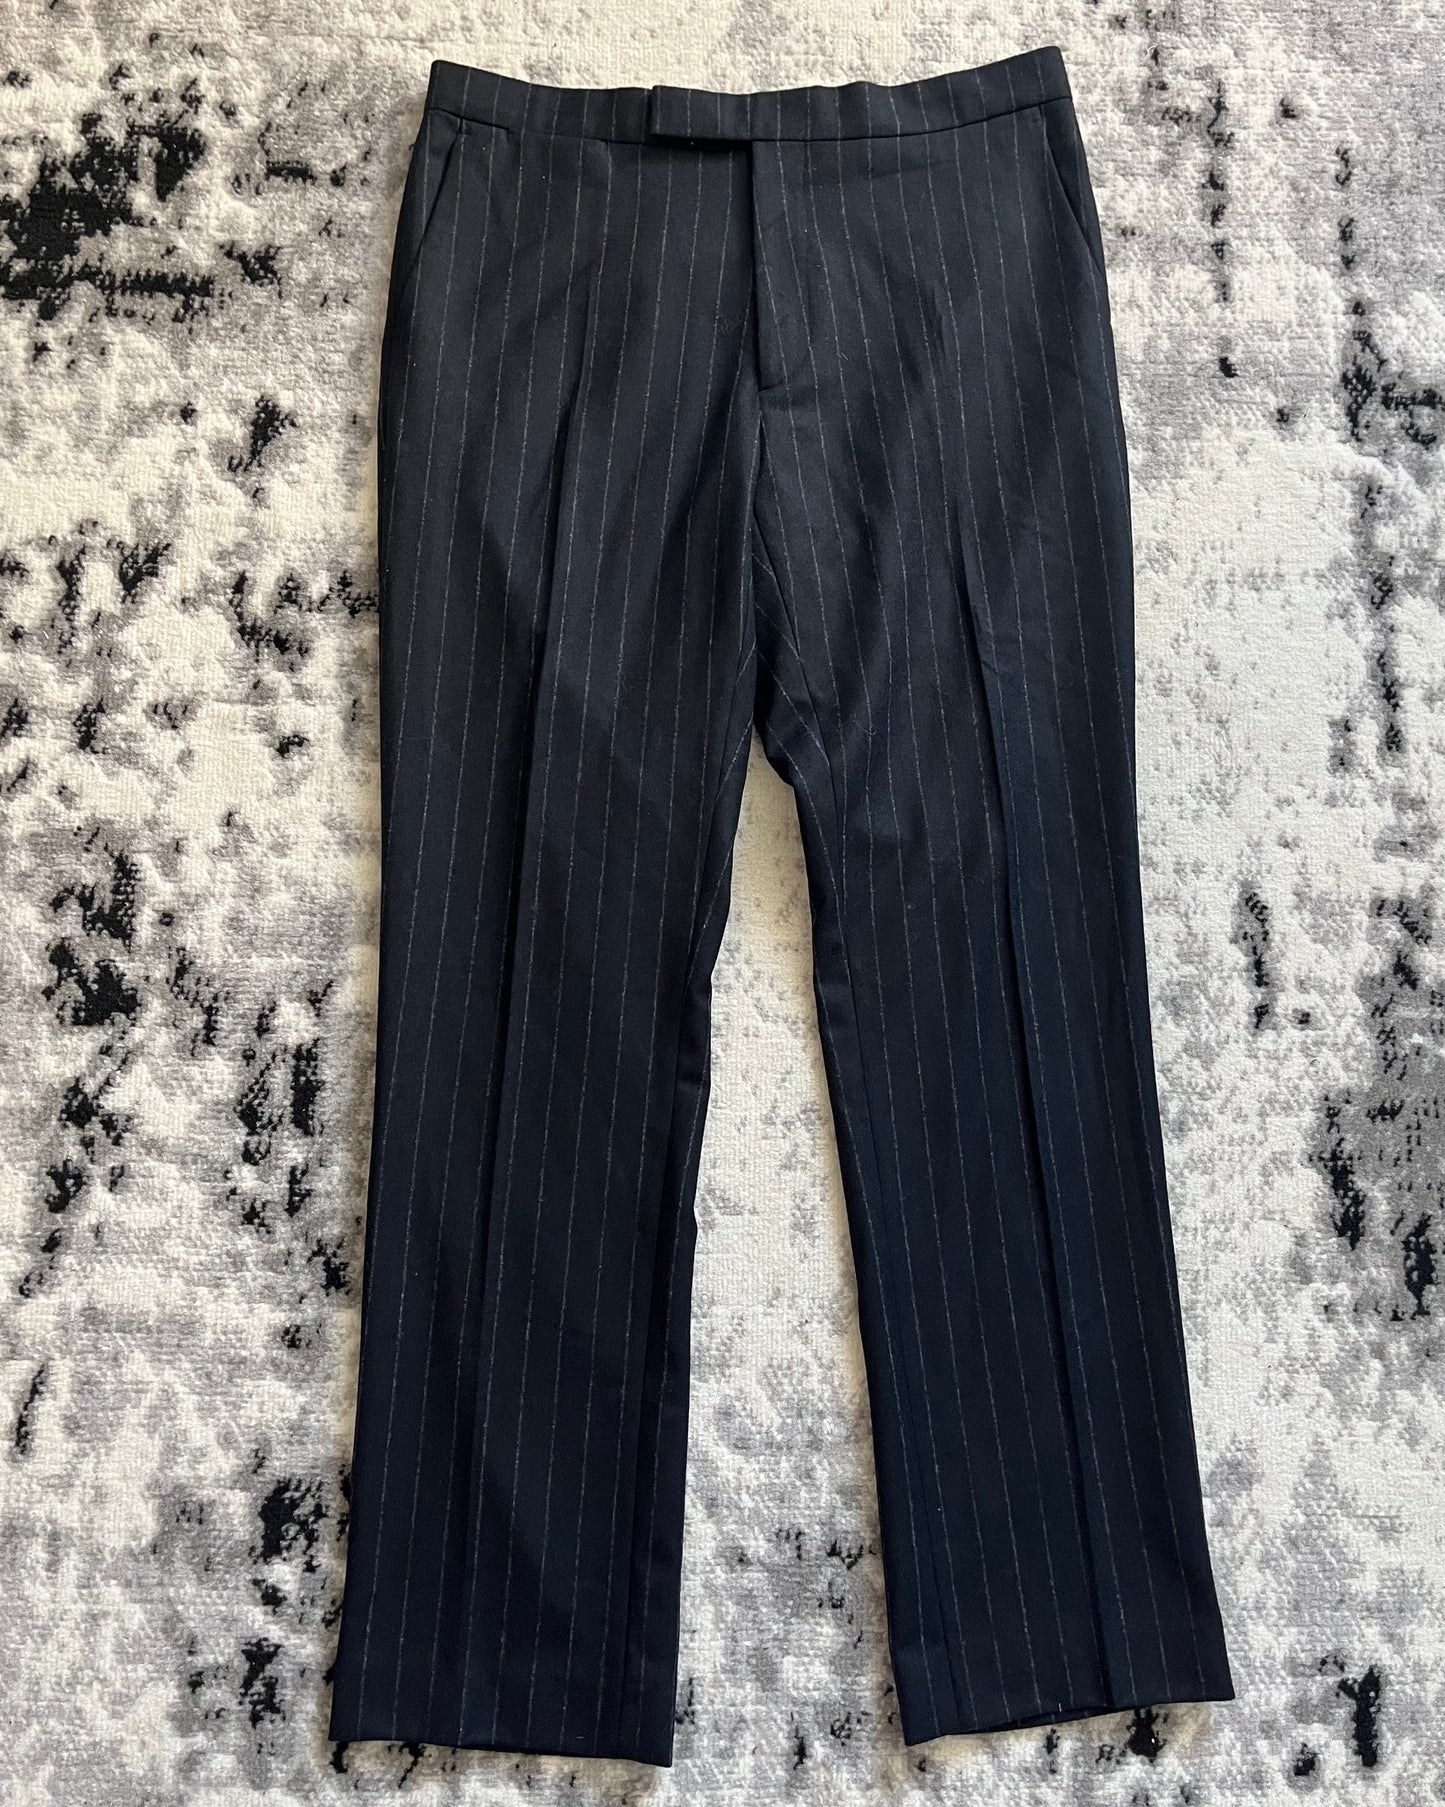 AW21 Raf Simons Tailored Wool Trousers (M/L)